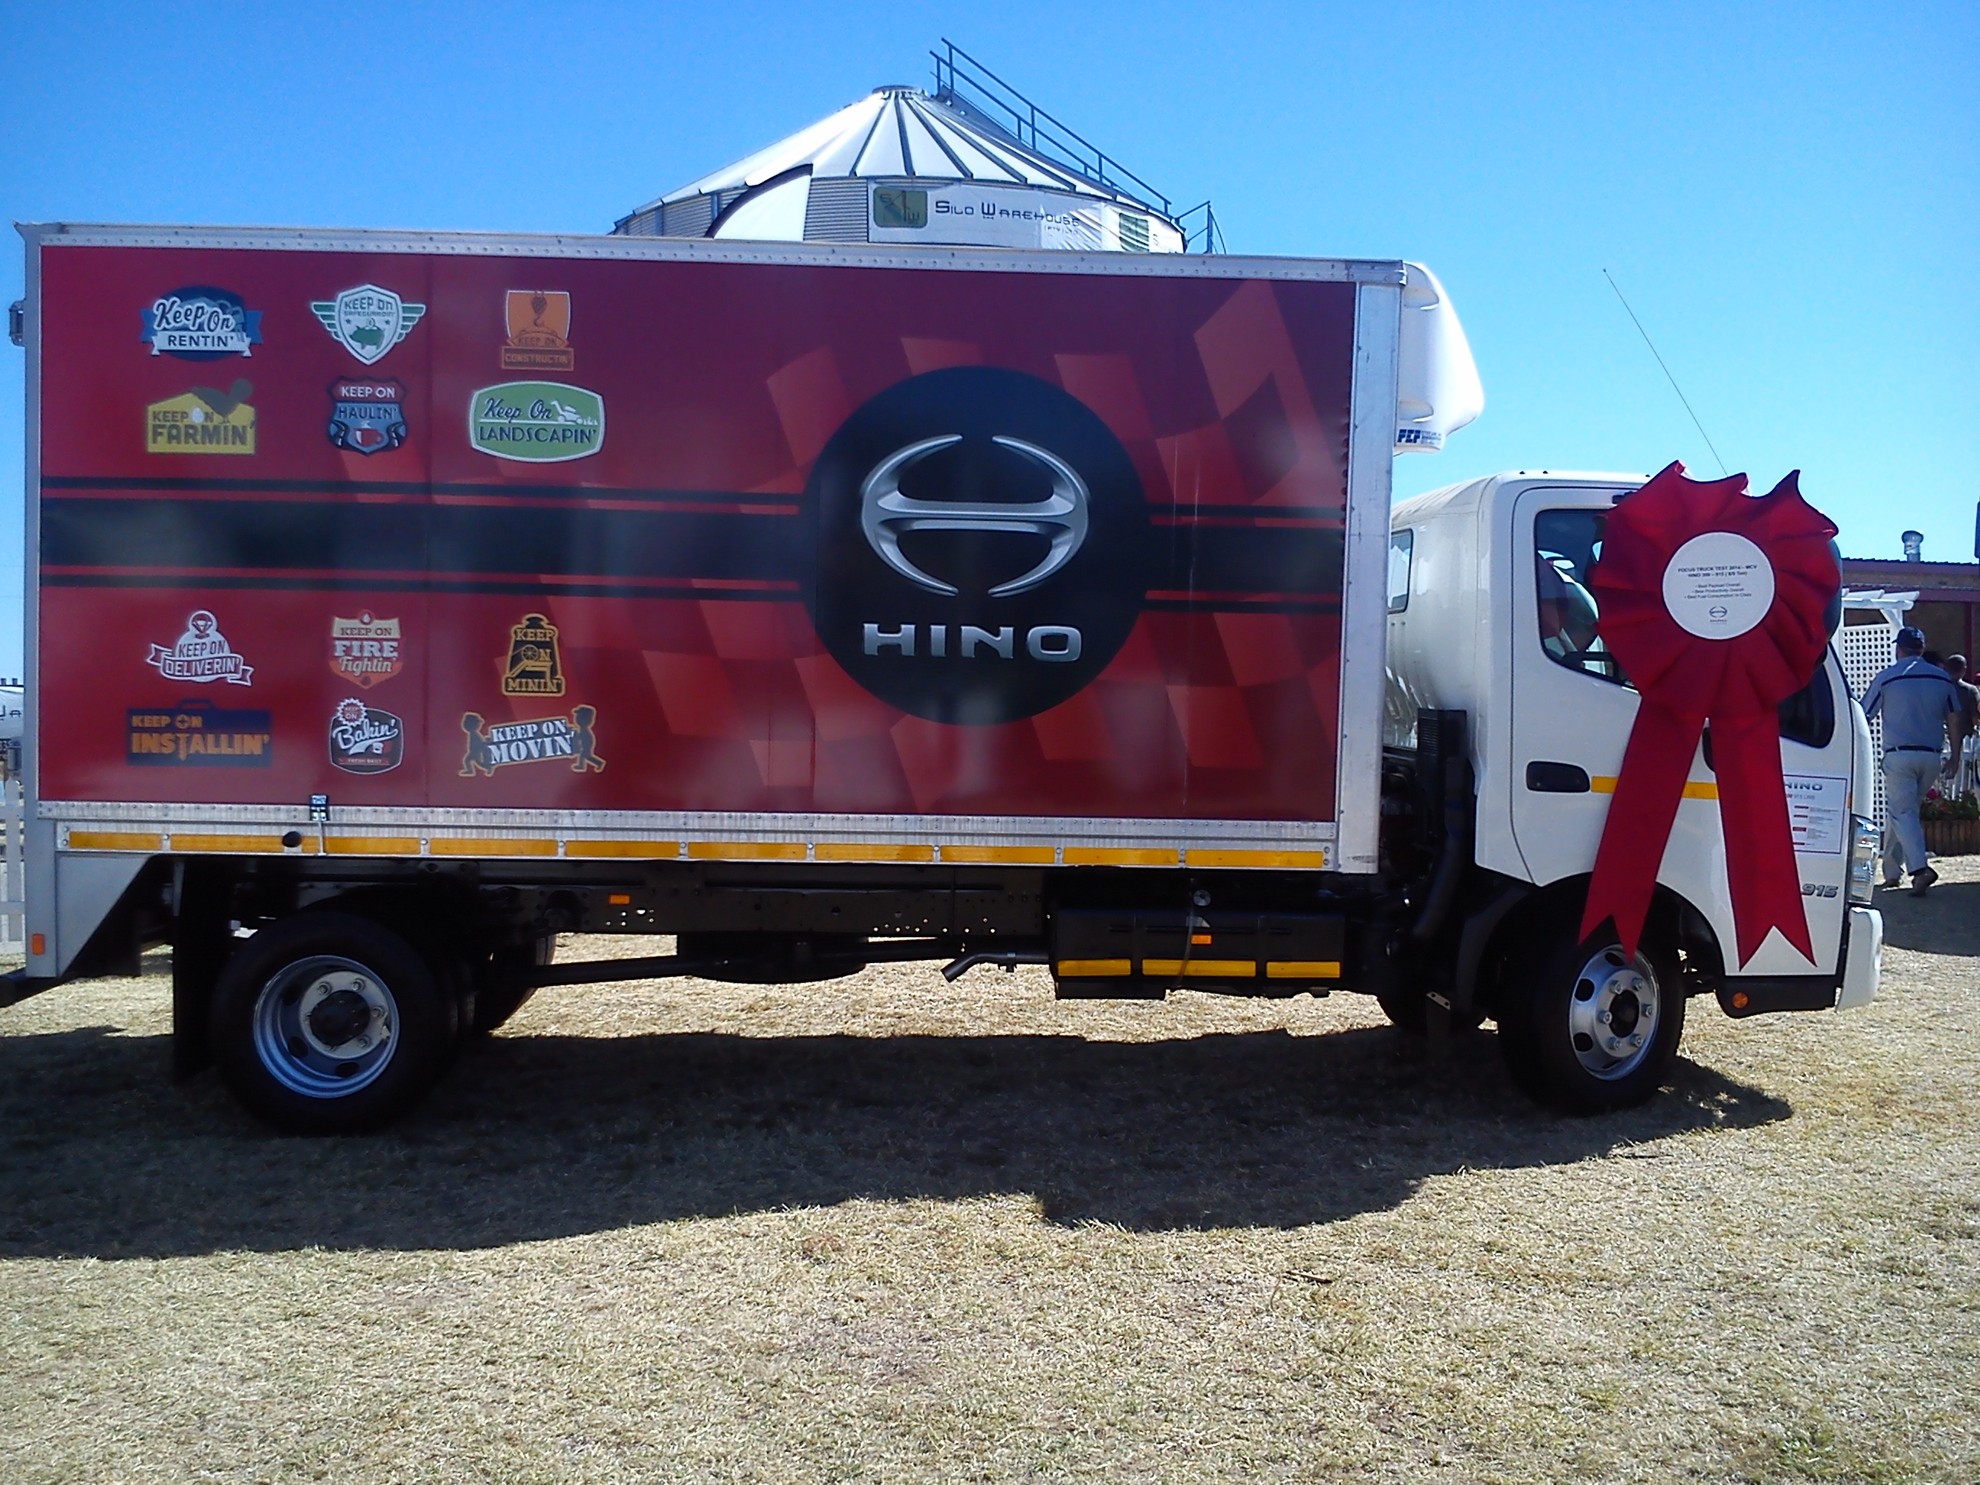 Hino at the 2014 Nampo agricultural show in Bothaville